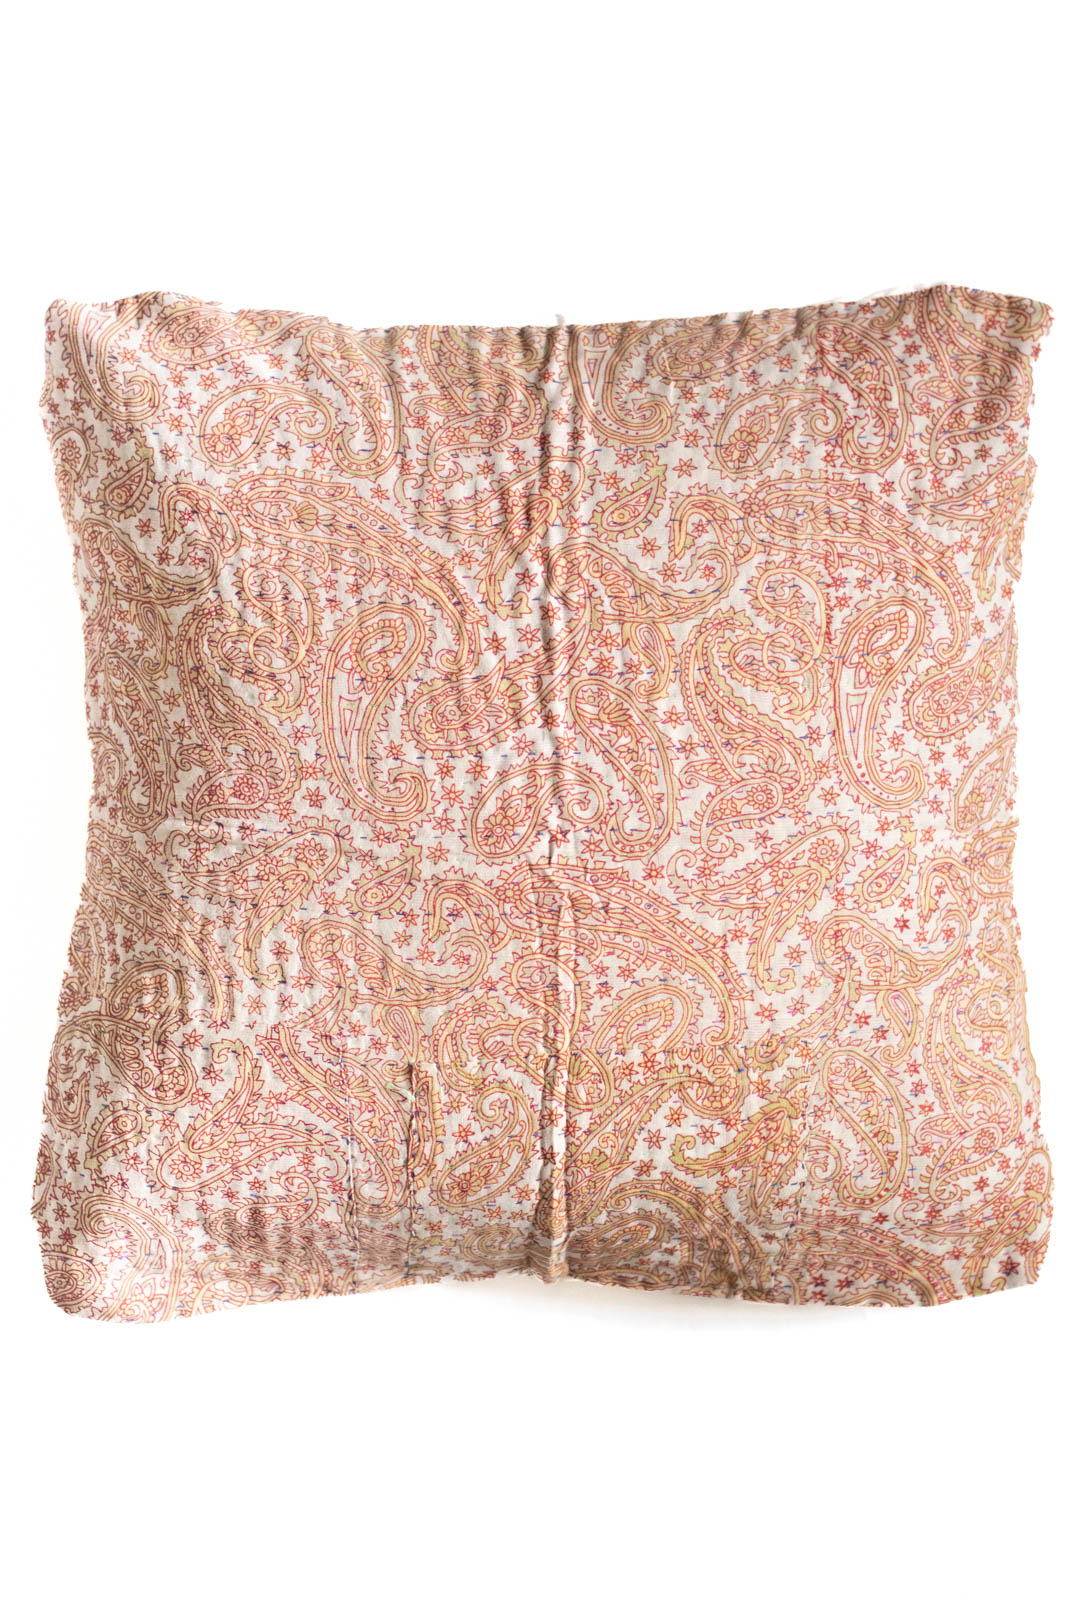 Worth no. 4 Kantha Pillow Cover